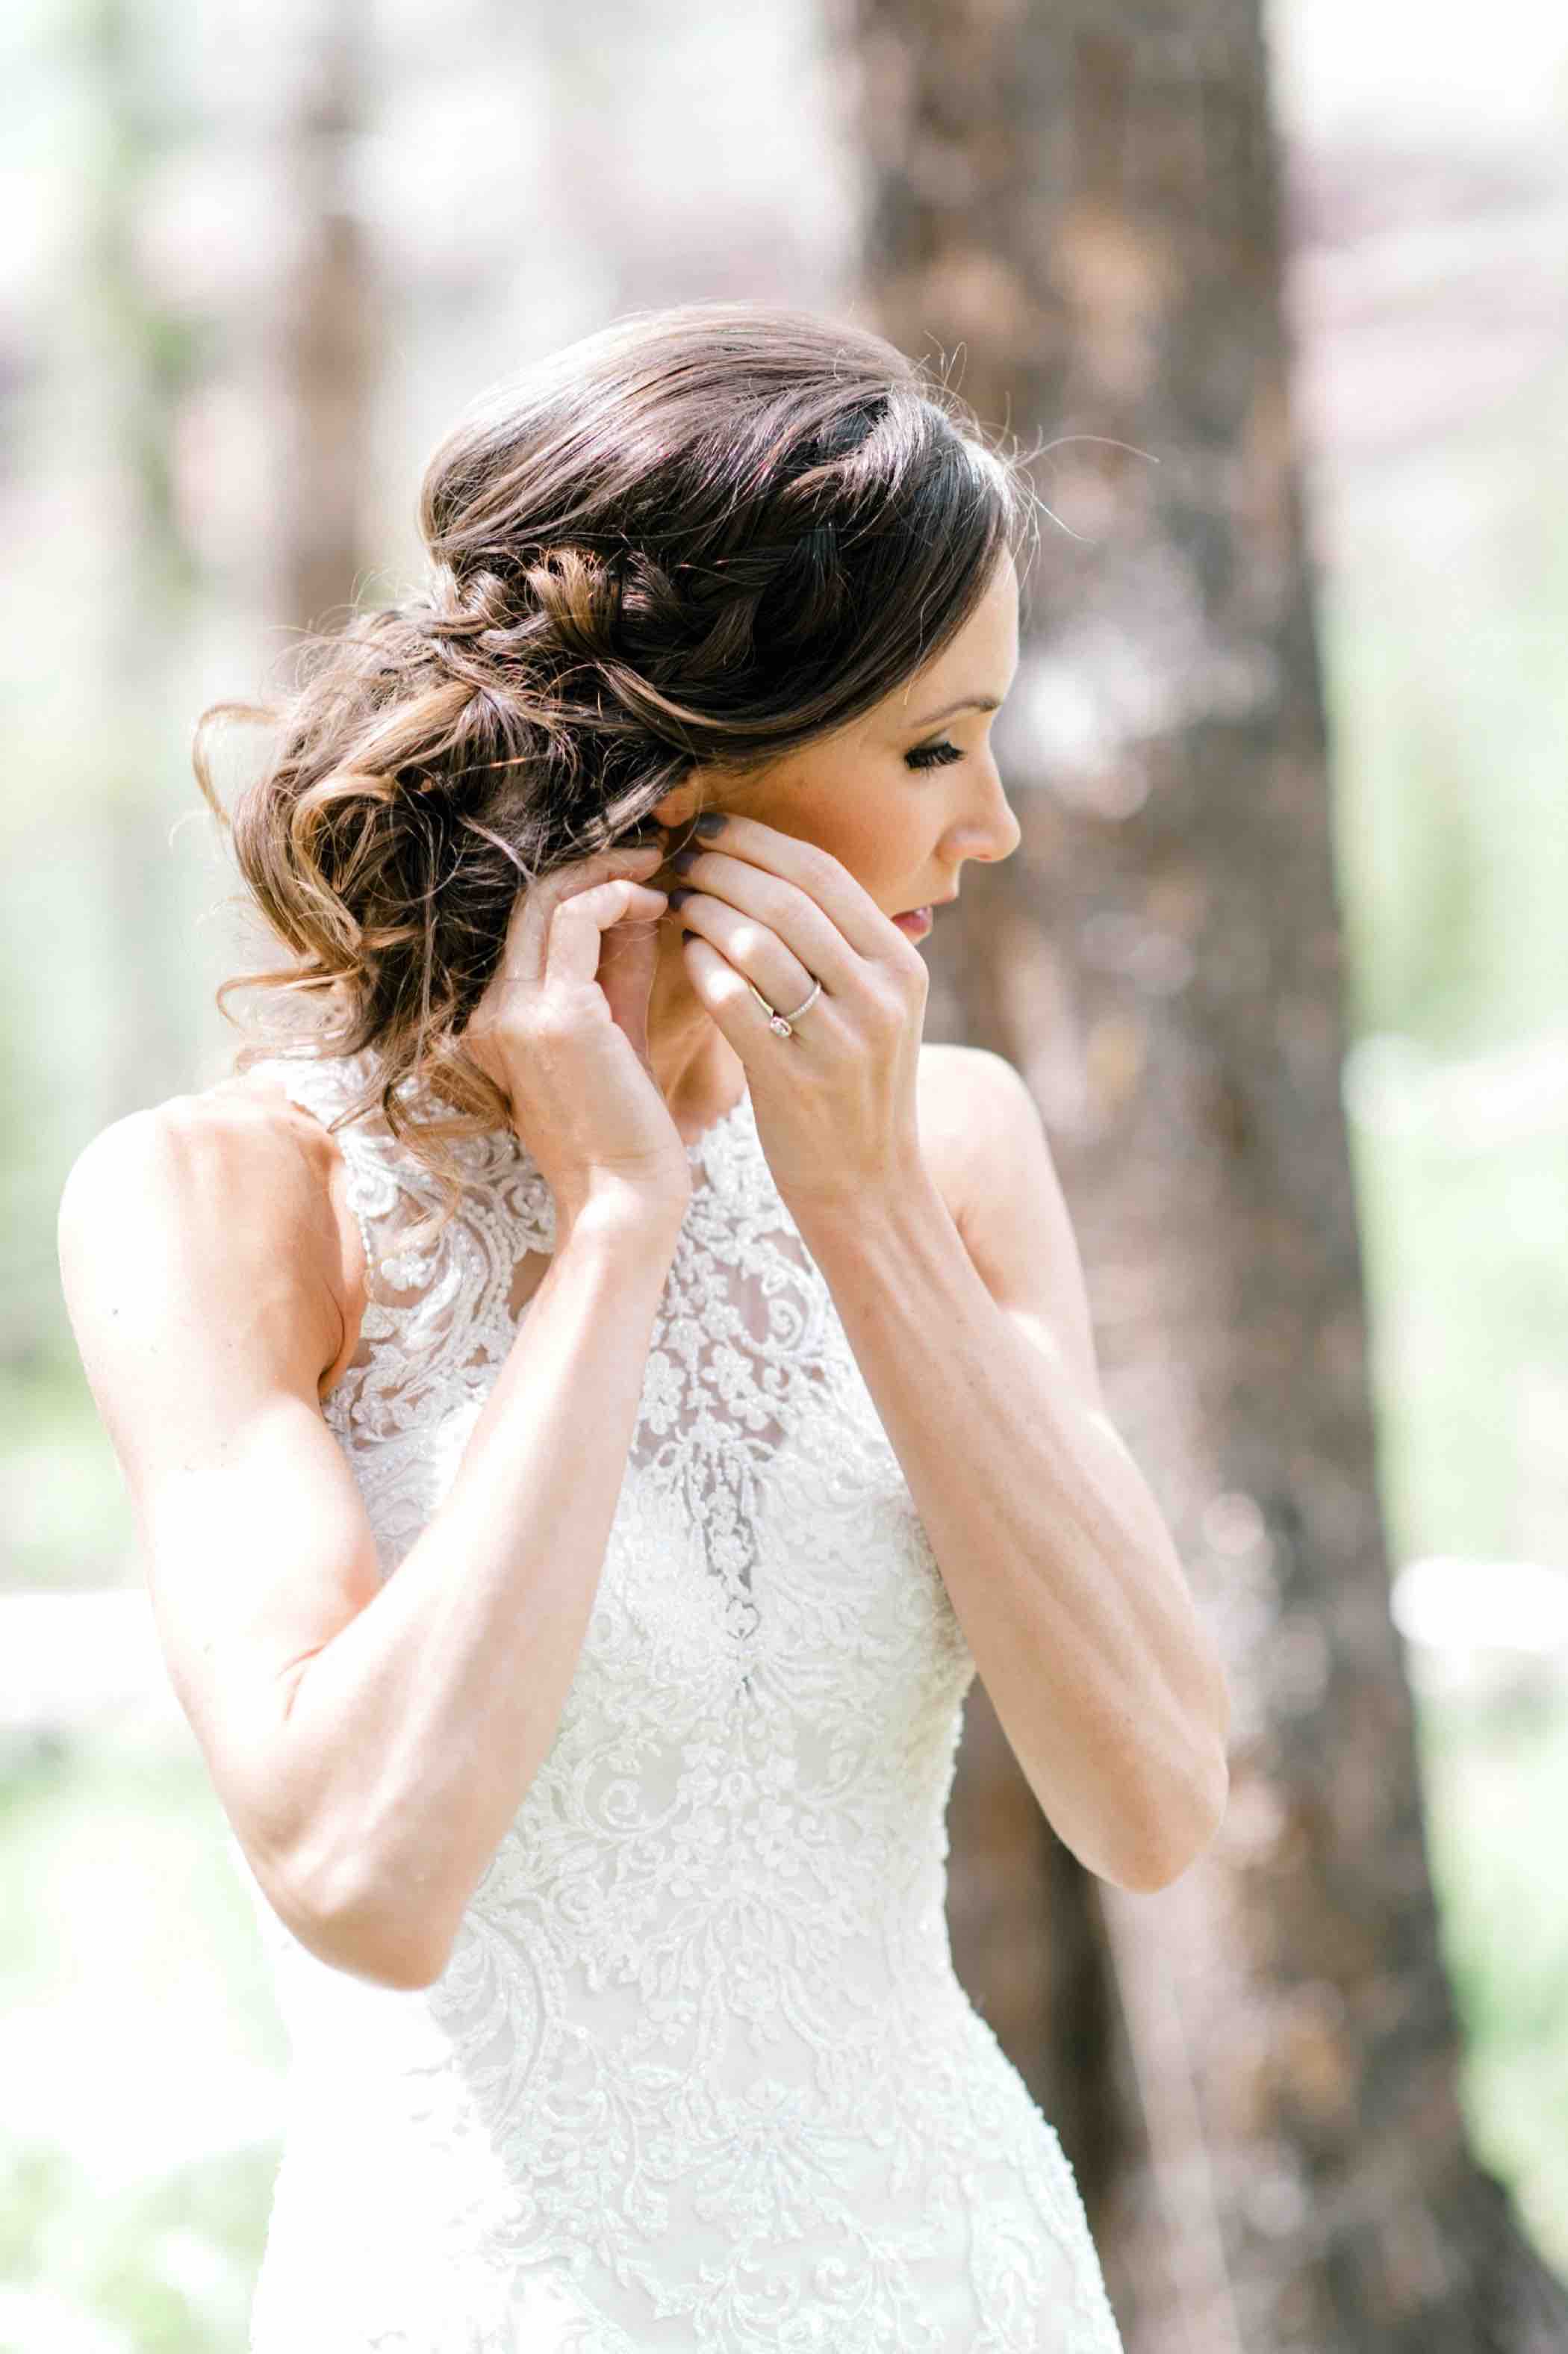 Sallie chose to get ready for her wedding at Piney River Ranch outdoors. Photo by Ali and Garrett, Romantic, Adventurous, Nostalgic Wedding Photographers.